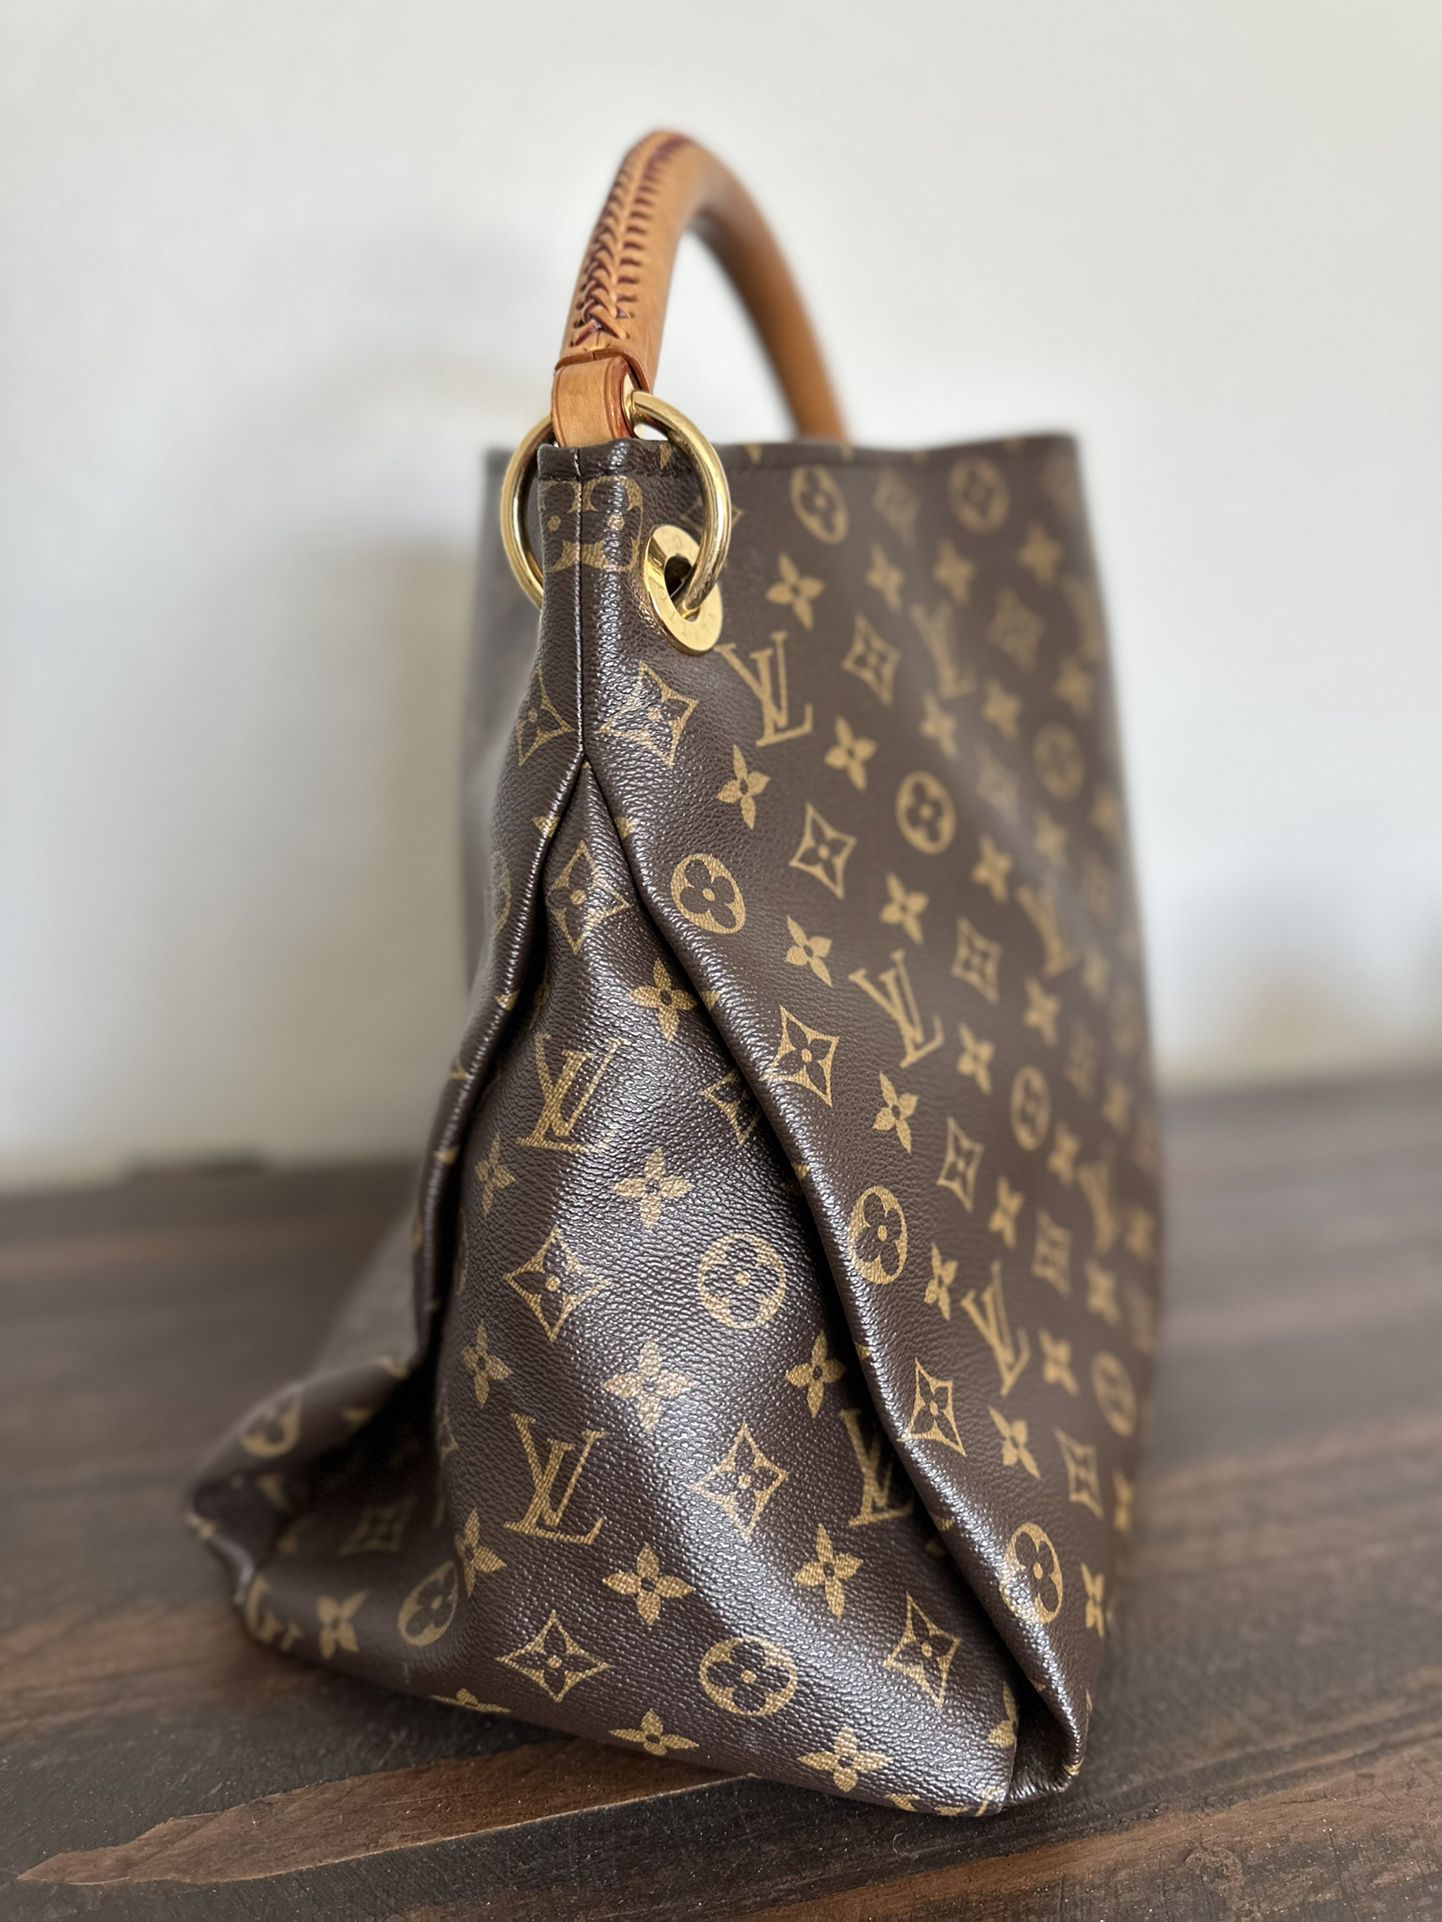 Authentic Louis Vuitton Artsy MM/GM $1500 Obo for Sale in Addison, TX -  OfferUp